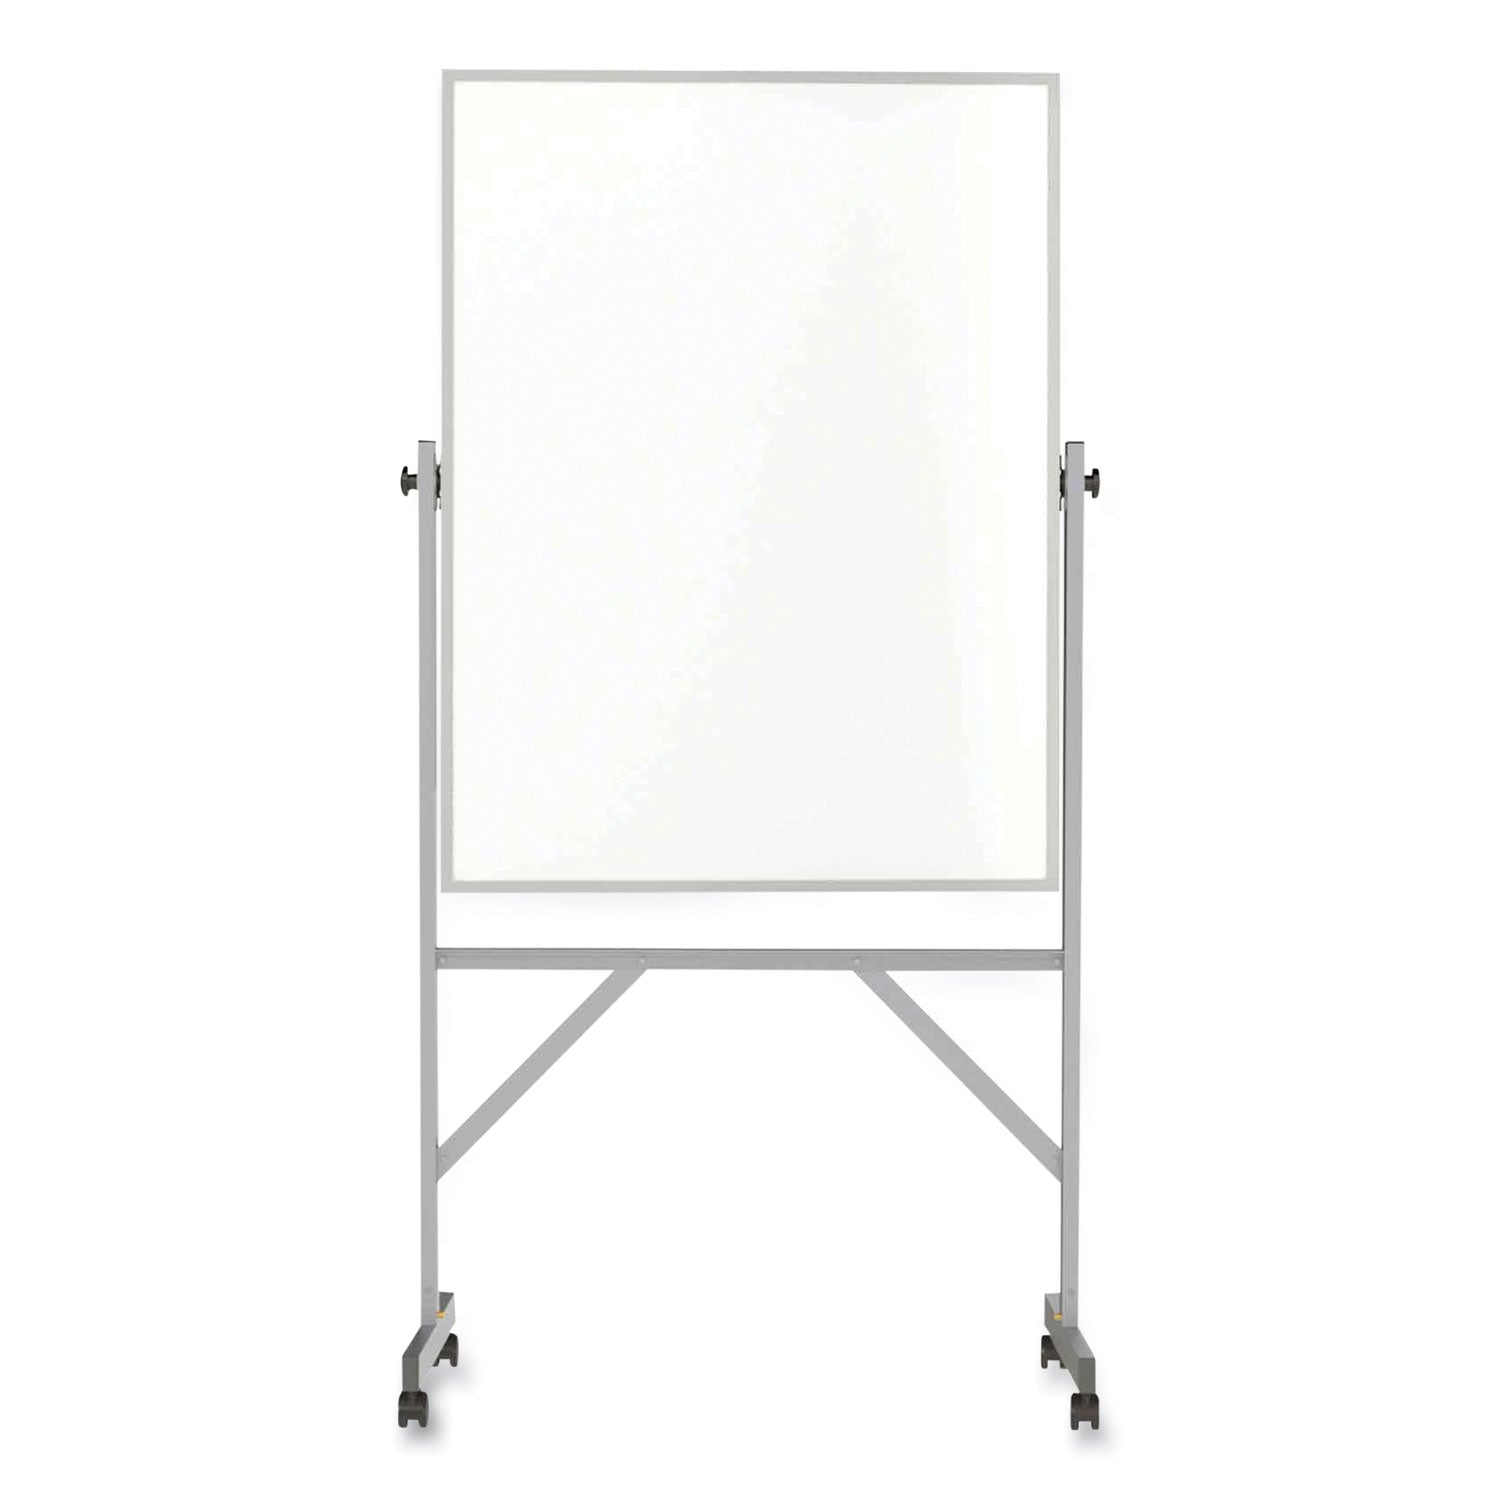 reversible-magnetic-porcelain-whiteboard-with-satin-aluminum-frame-and-stand-36-x-48-white-surface-ships-in-7-10-bus-days_ghearm1m143 - 1